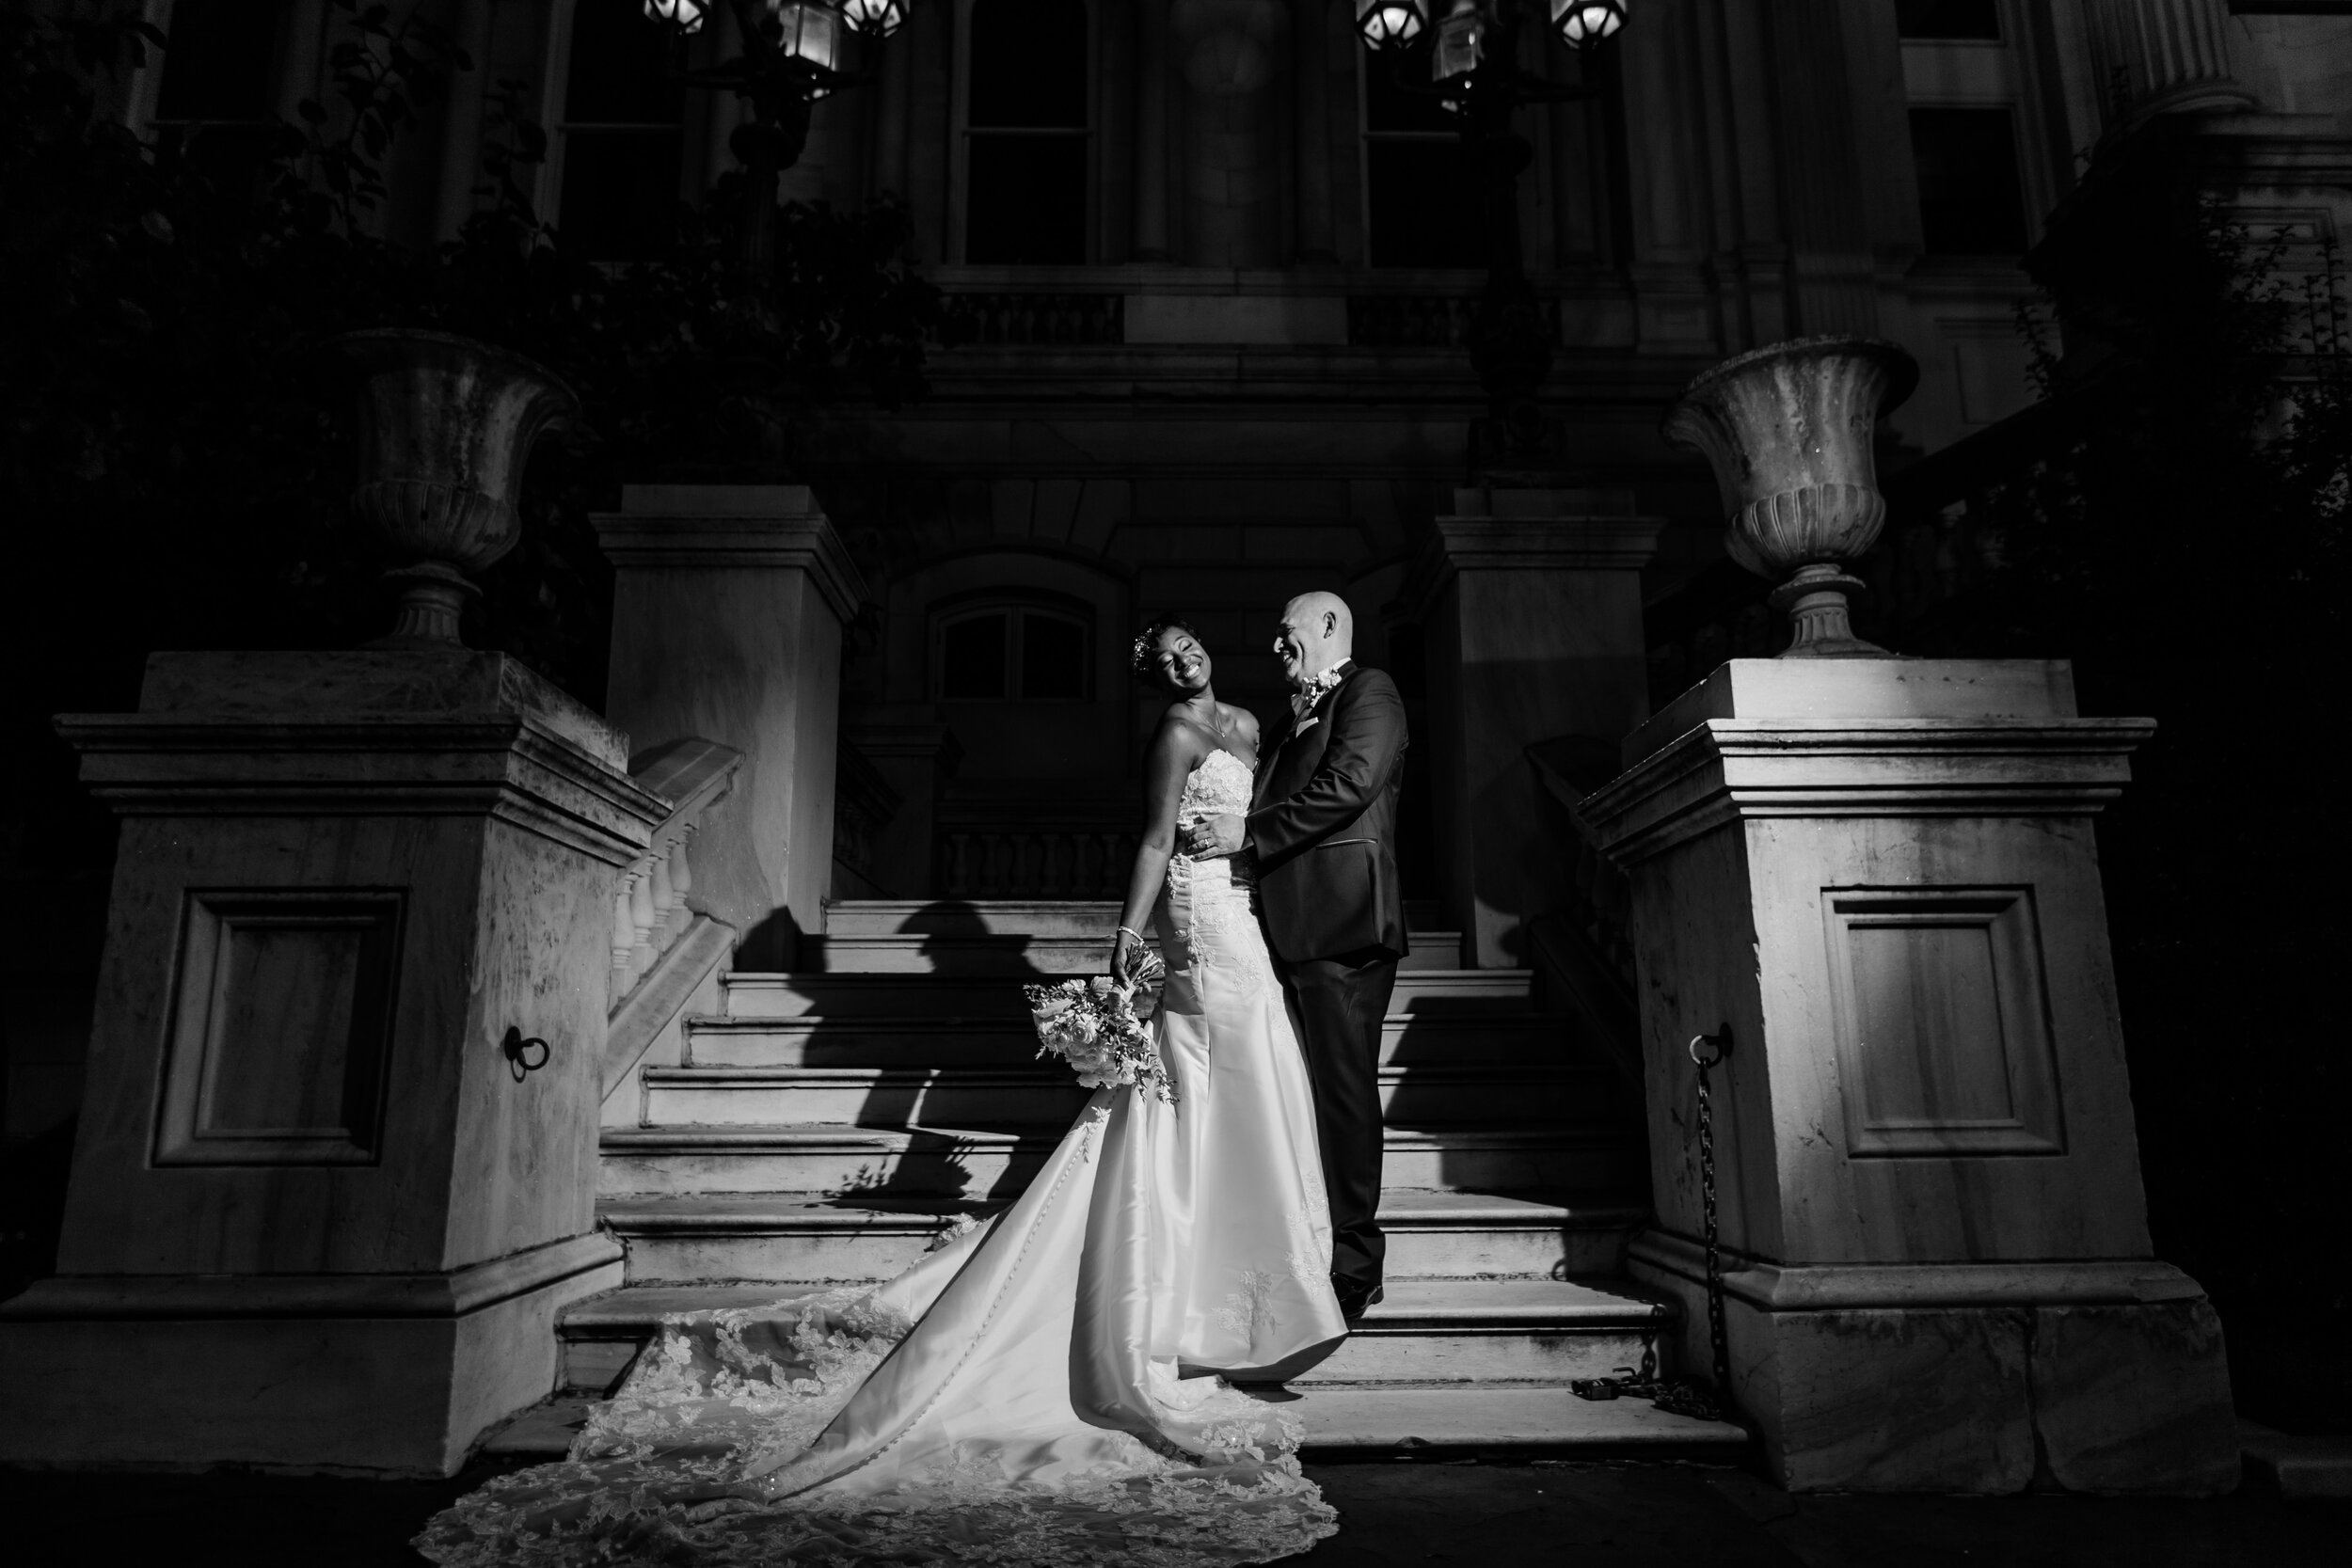 get married in baltimore city hall shot by megapixels media biracial couple wedding photographers maryland-90.jpg